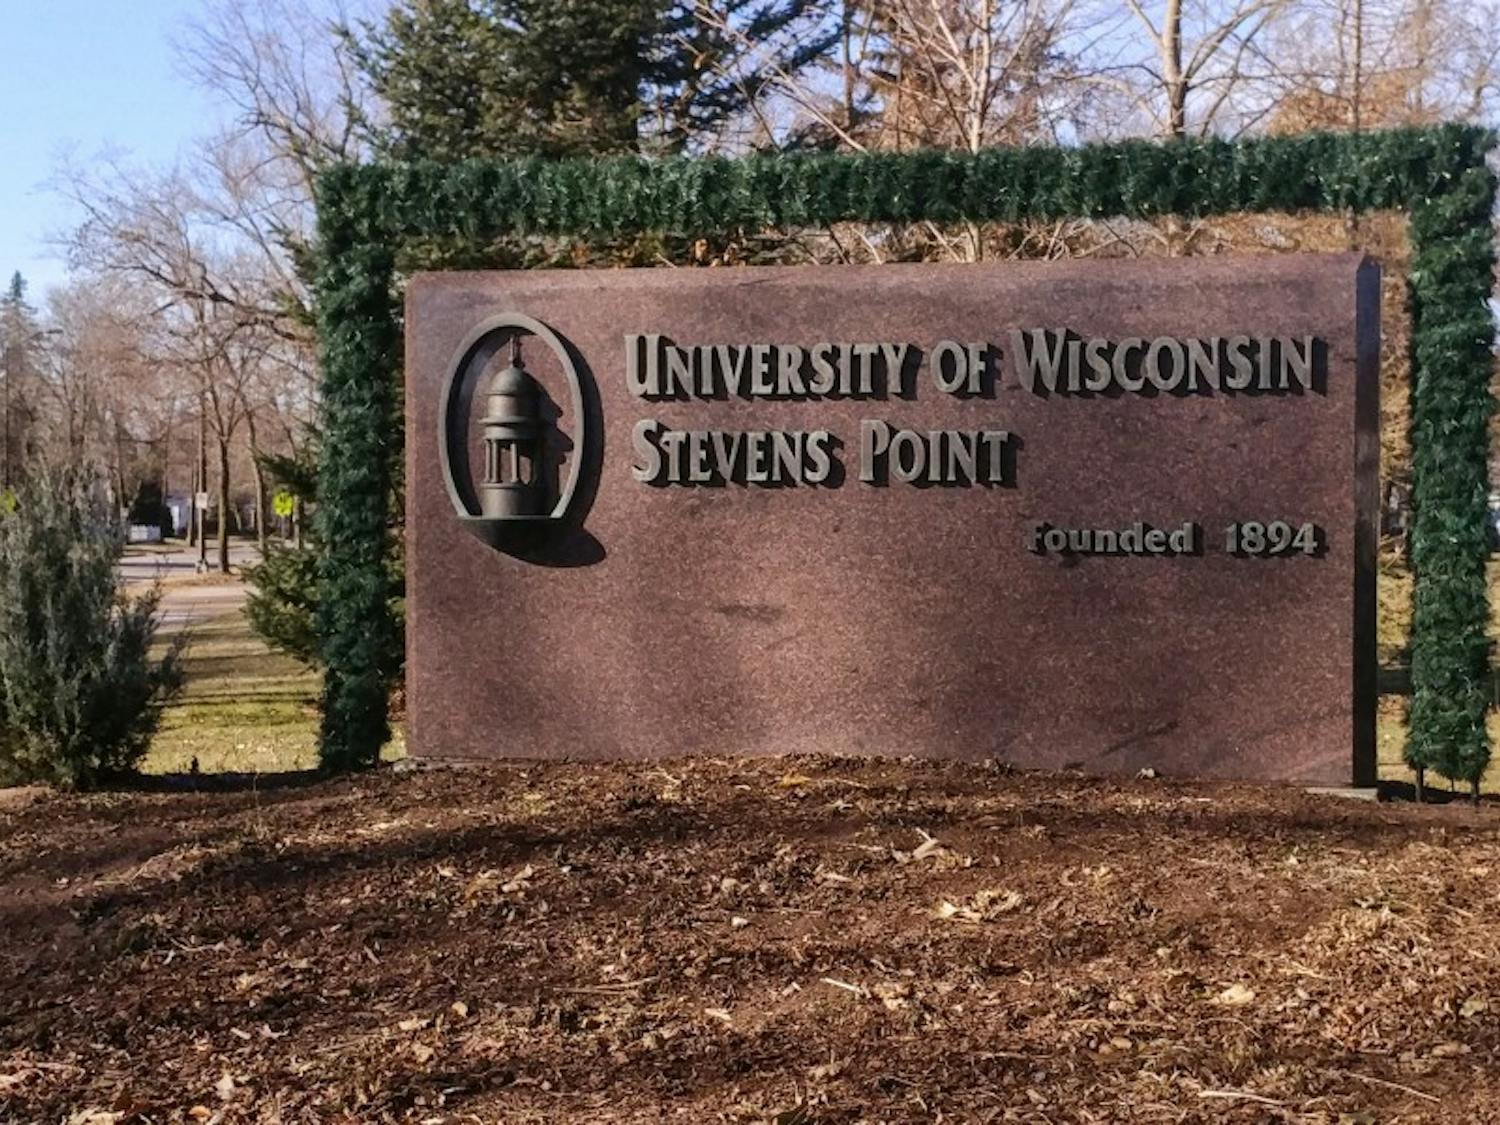 UW-Stevens Point may reconsider plans to axe majors after student protests